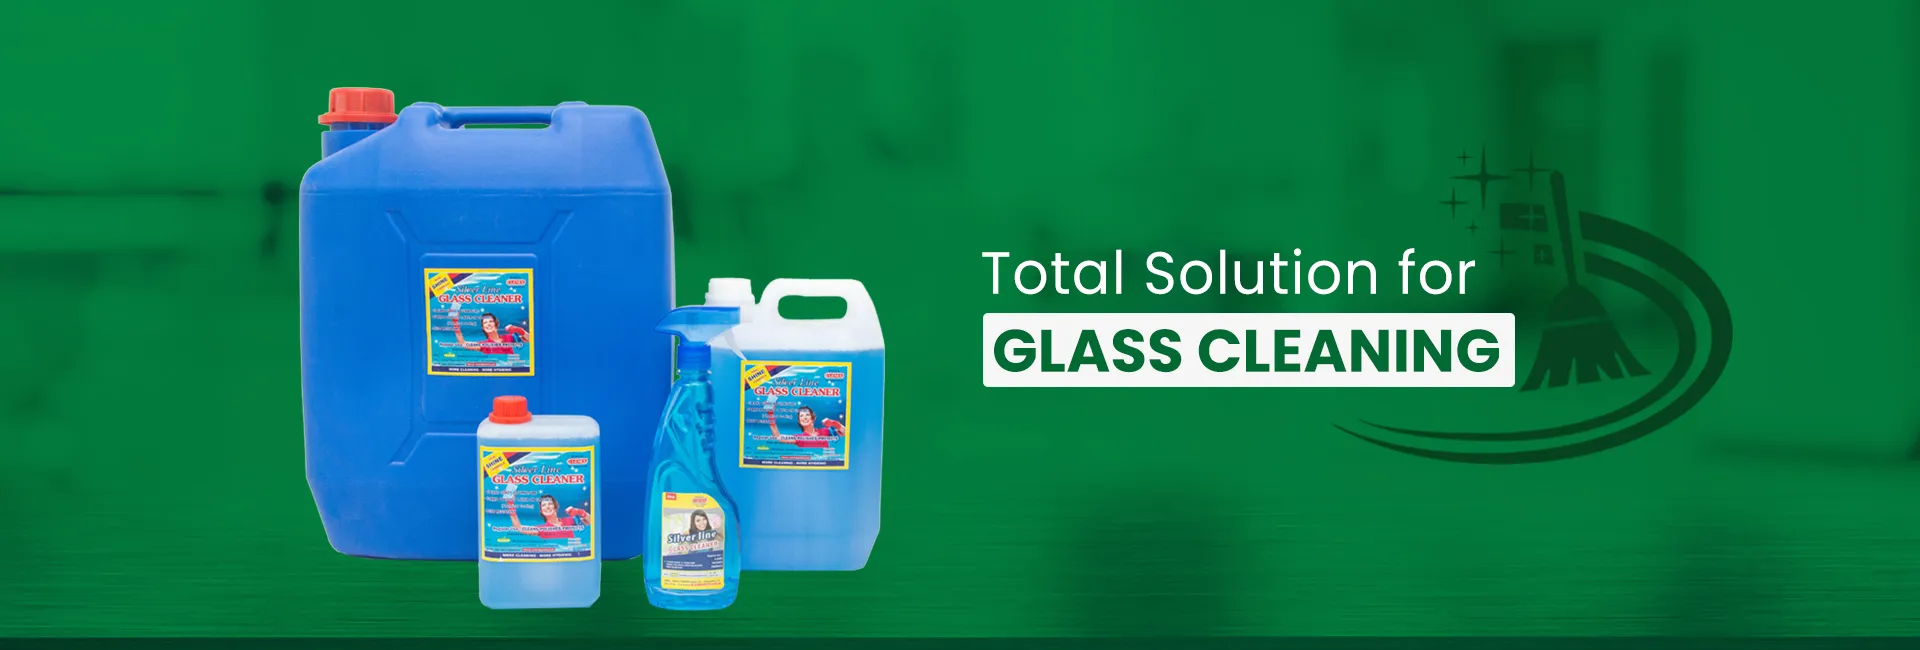 Glass Cleaning Solution Manufacturer